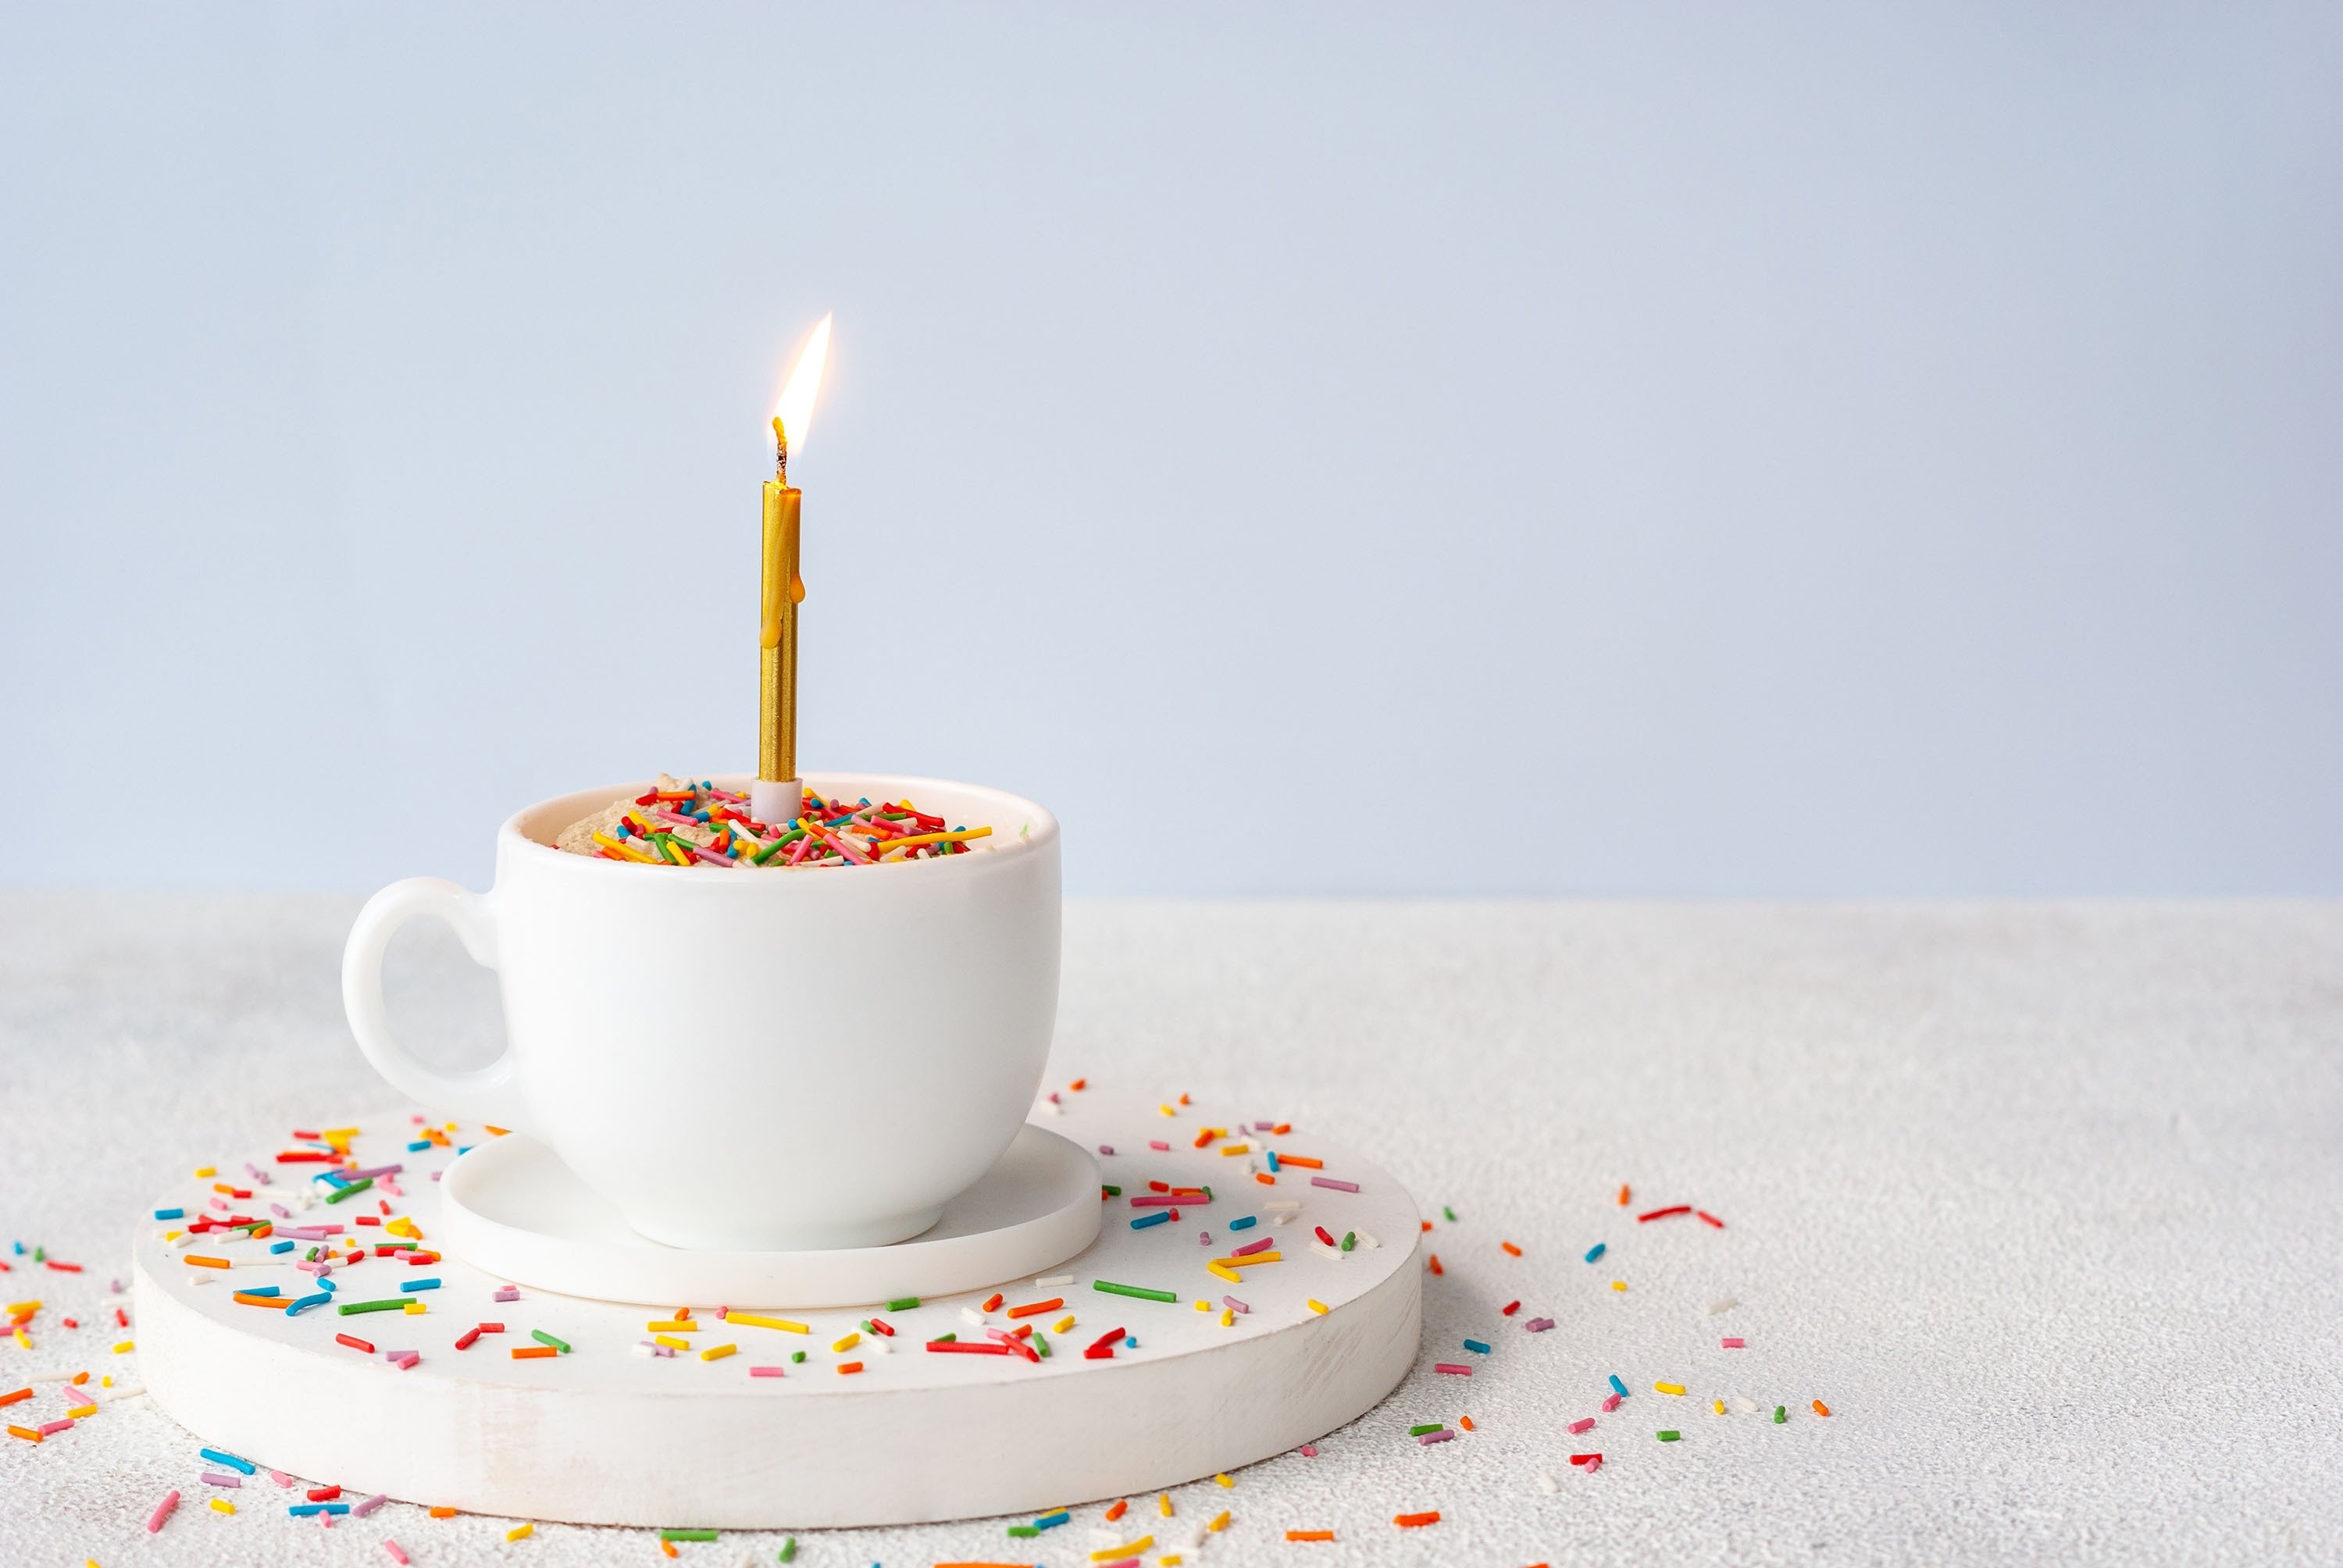 Vanilla might be the best, especially when it comes to birthday cakes. (Shutterstock Photo)